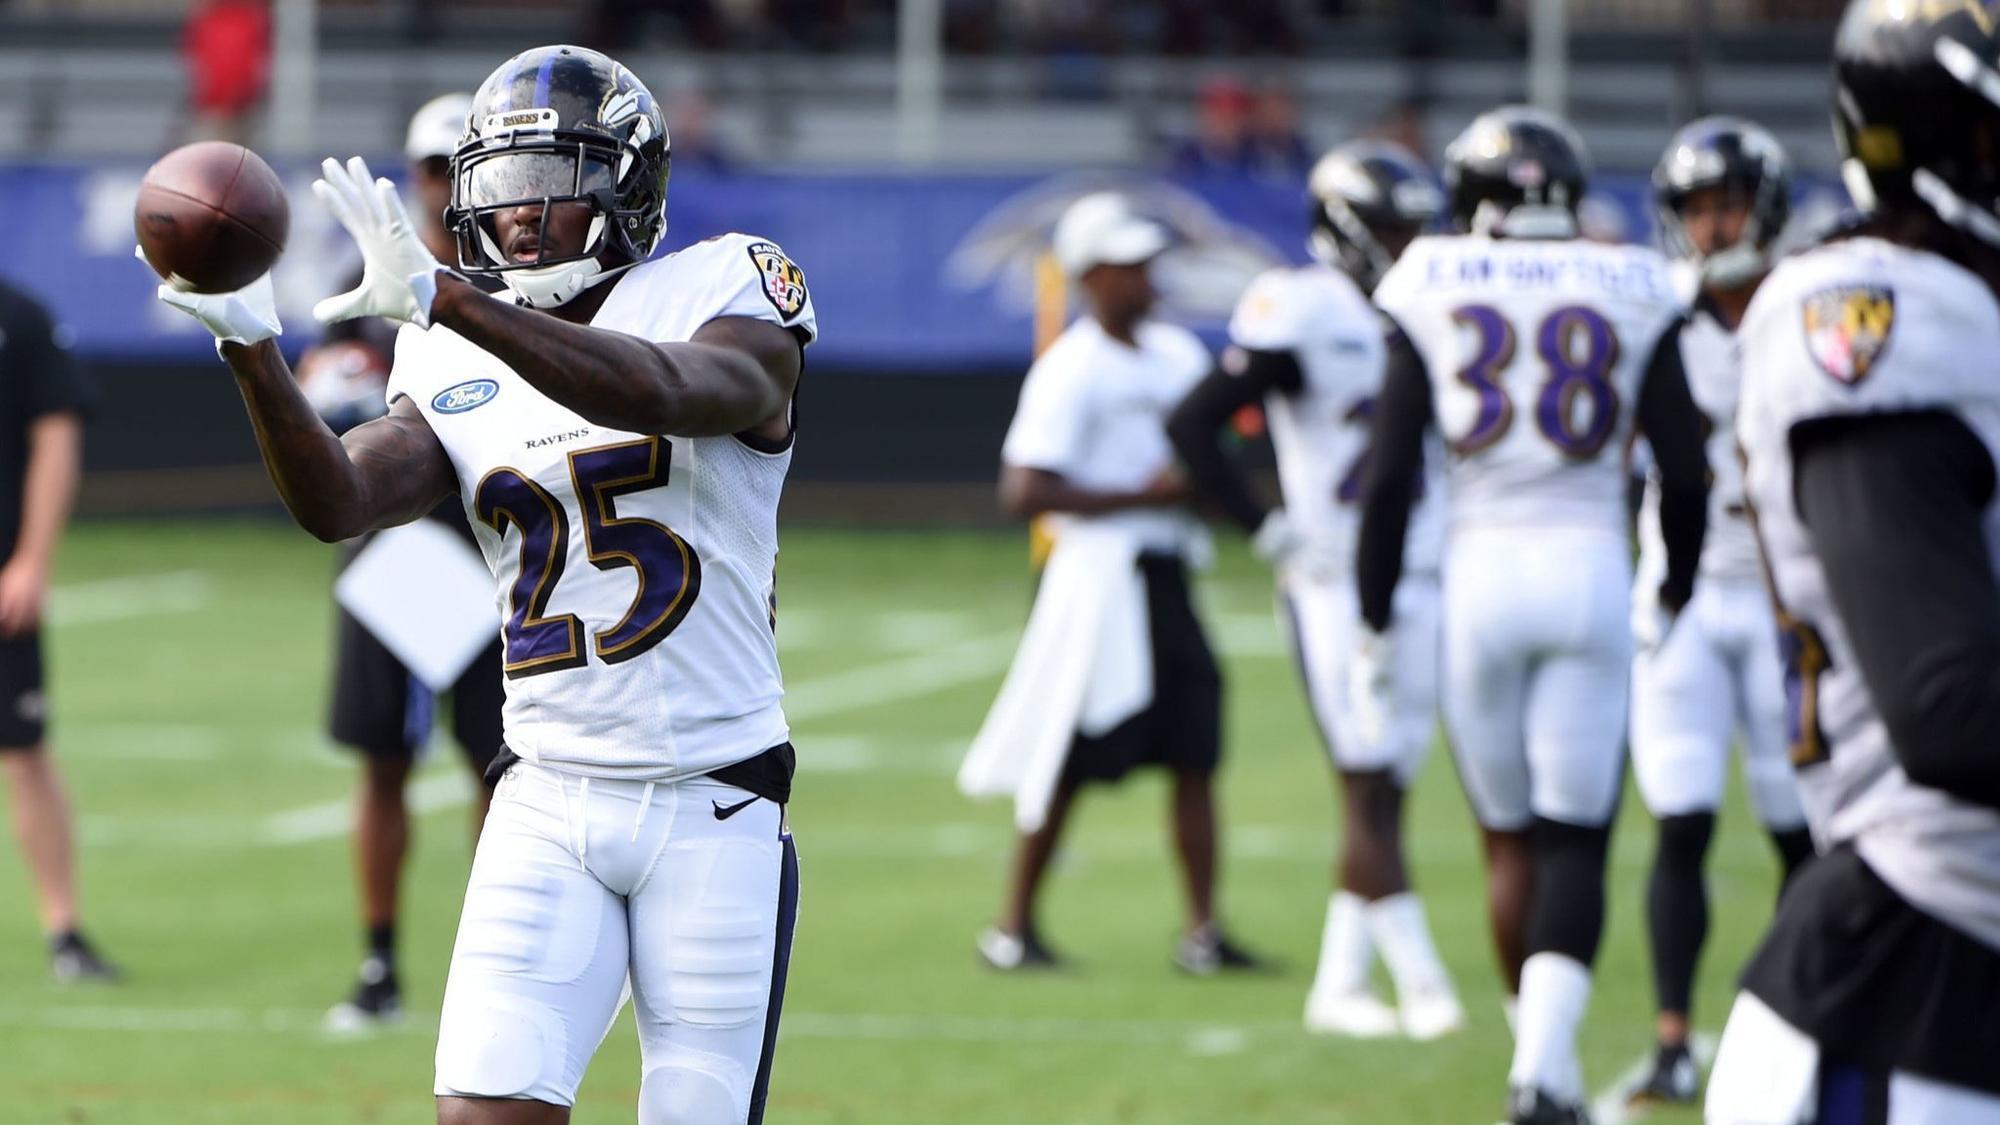 Ravens training camp highlights No green light in the red zone Sunday